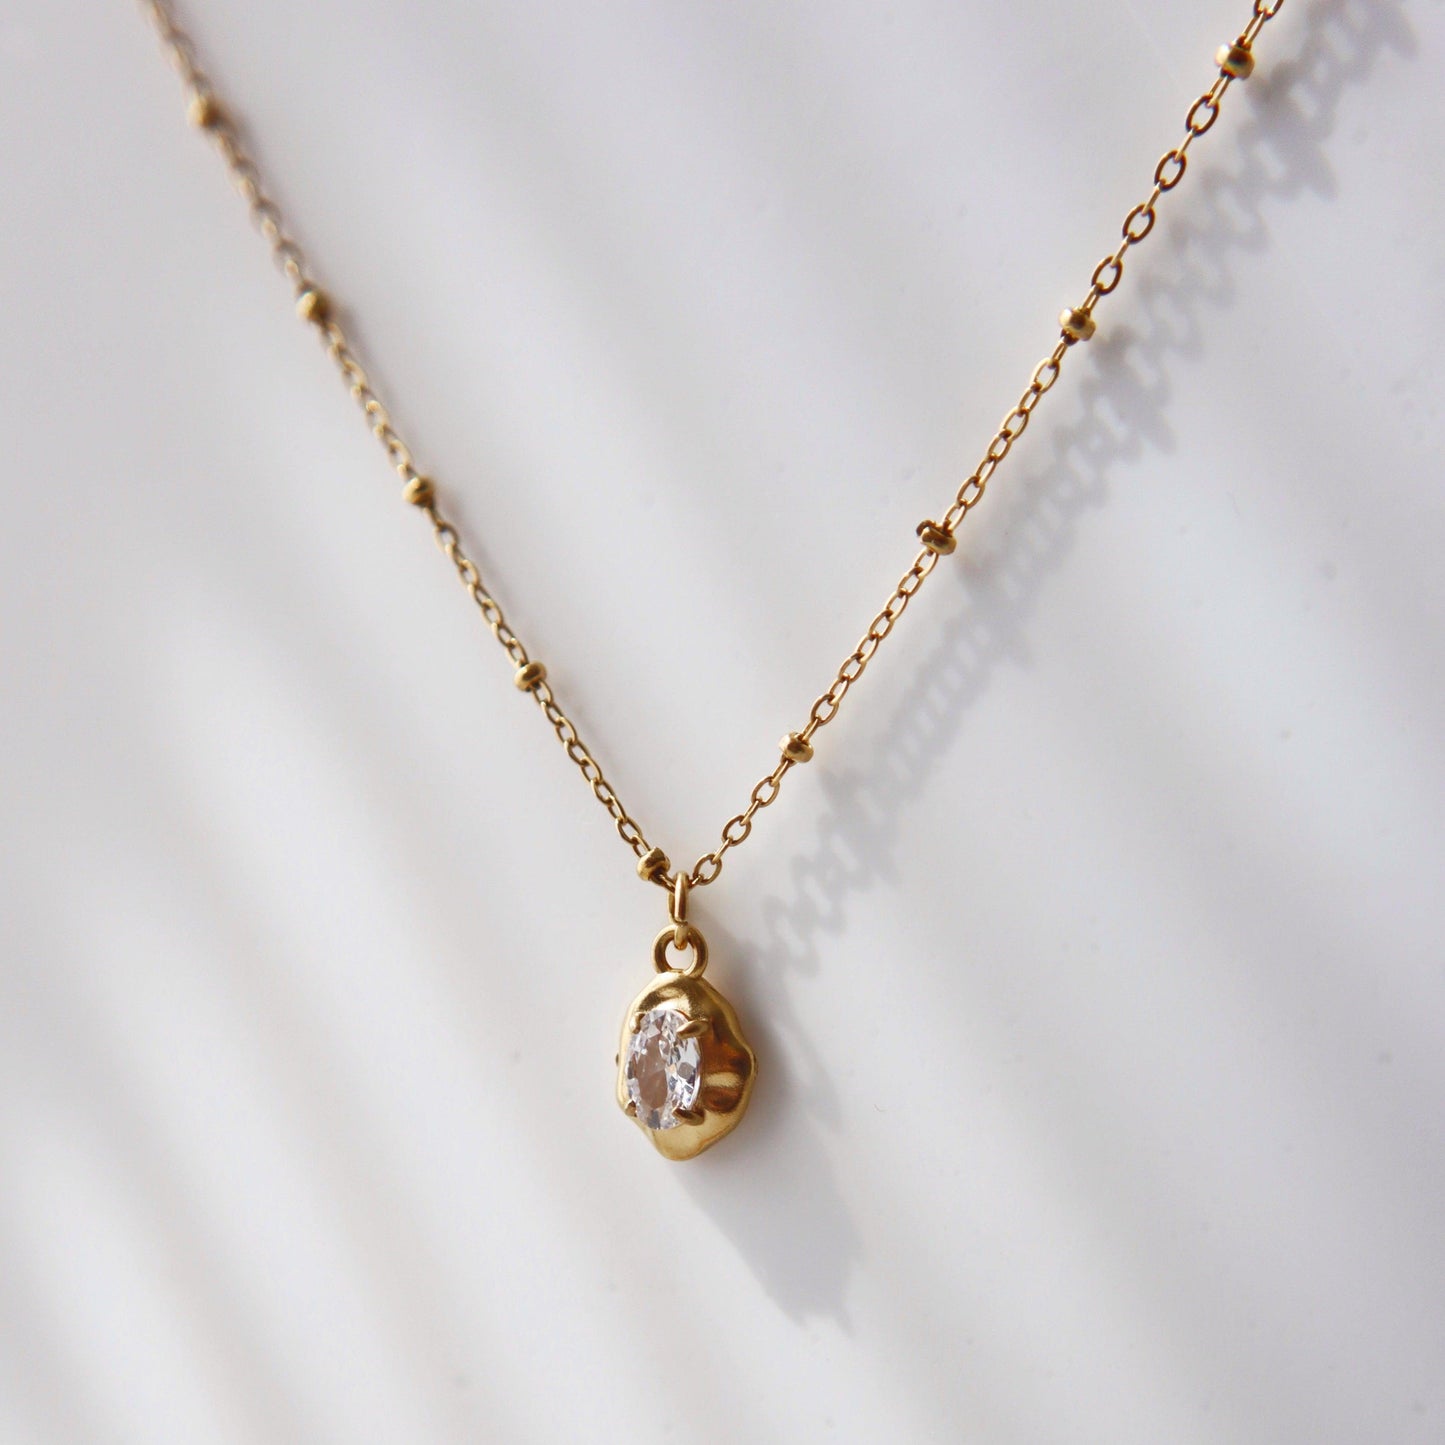 Raina Pebble Necklace | Pendant Necklace - JESSA JEWELRY | GOLD JEWELRY; dainty, affordable gold everyday jewelry. Tarnish free, water-resistant, hypoallergenic. Jewelry for everyday wear